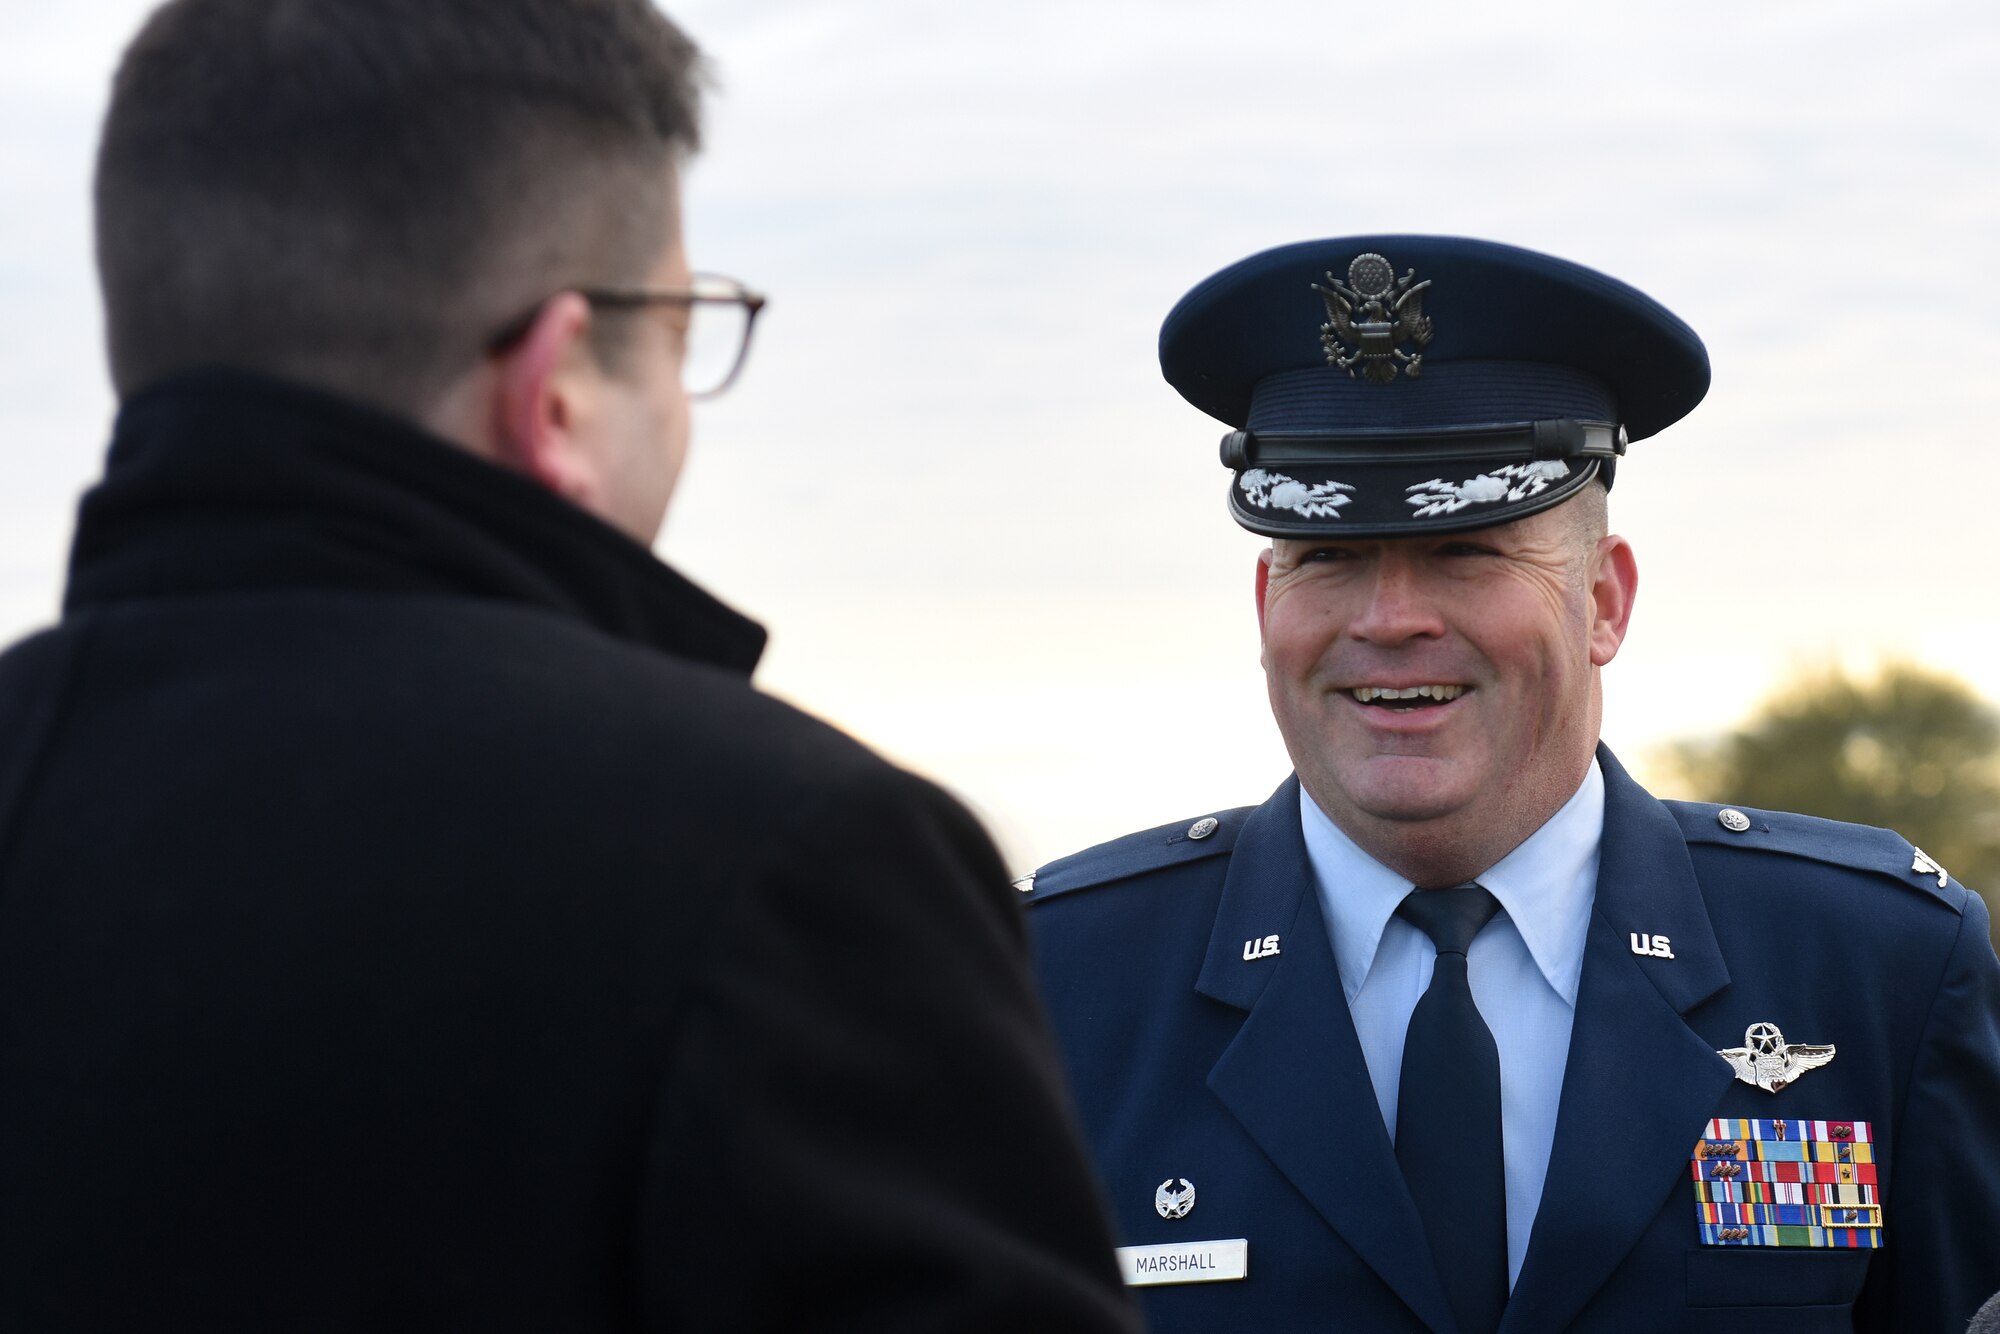 Col. Will Marshall, 48th Fighter Wing commander, talks to a community member at Lavenham Airfield, England, Jan. 20, 2020. Marshall visited Lavenham Airfield to help lay down the first brick for a long-lasting memorial honoring 233 U.S. military service members that died in World War II. (U.S. Air Force photo by Airman 1st Class Madeline Herzog)